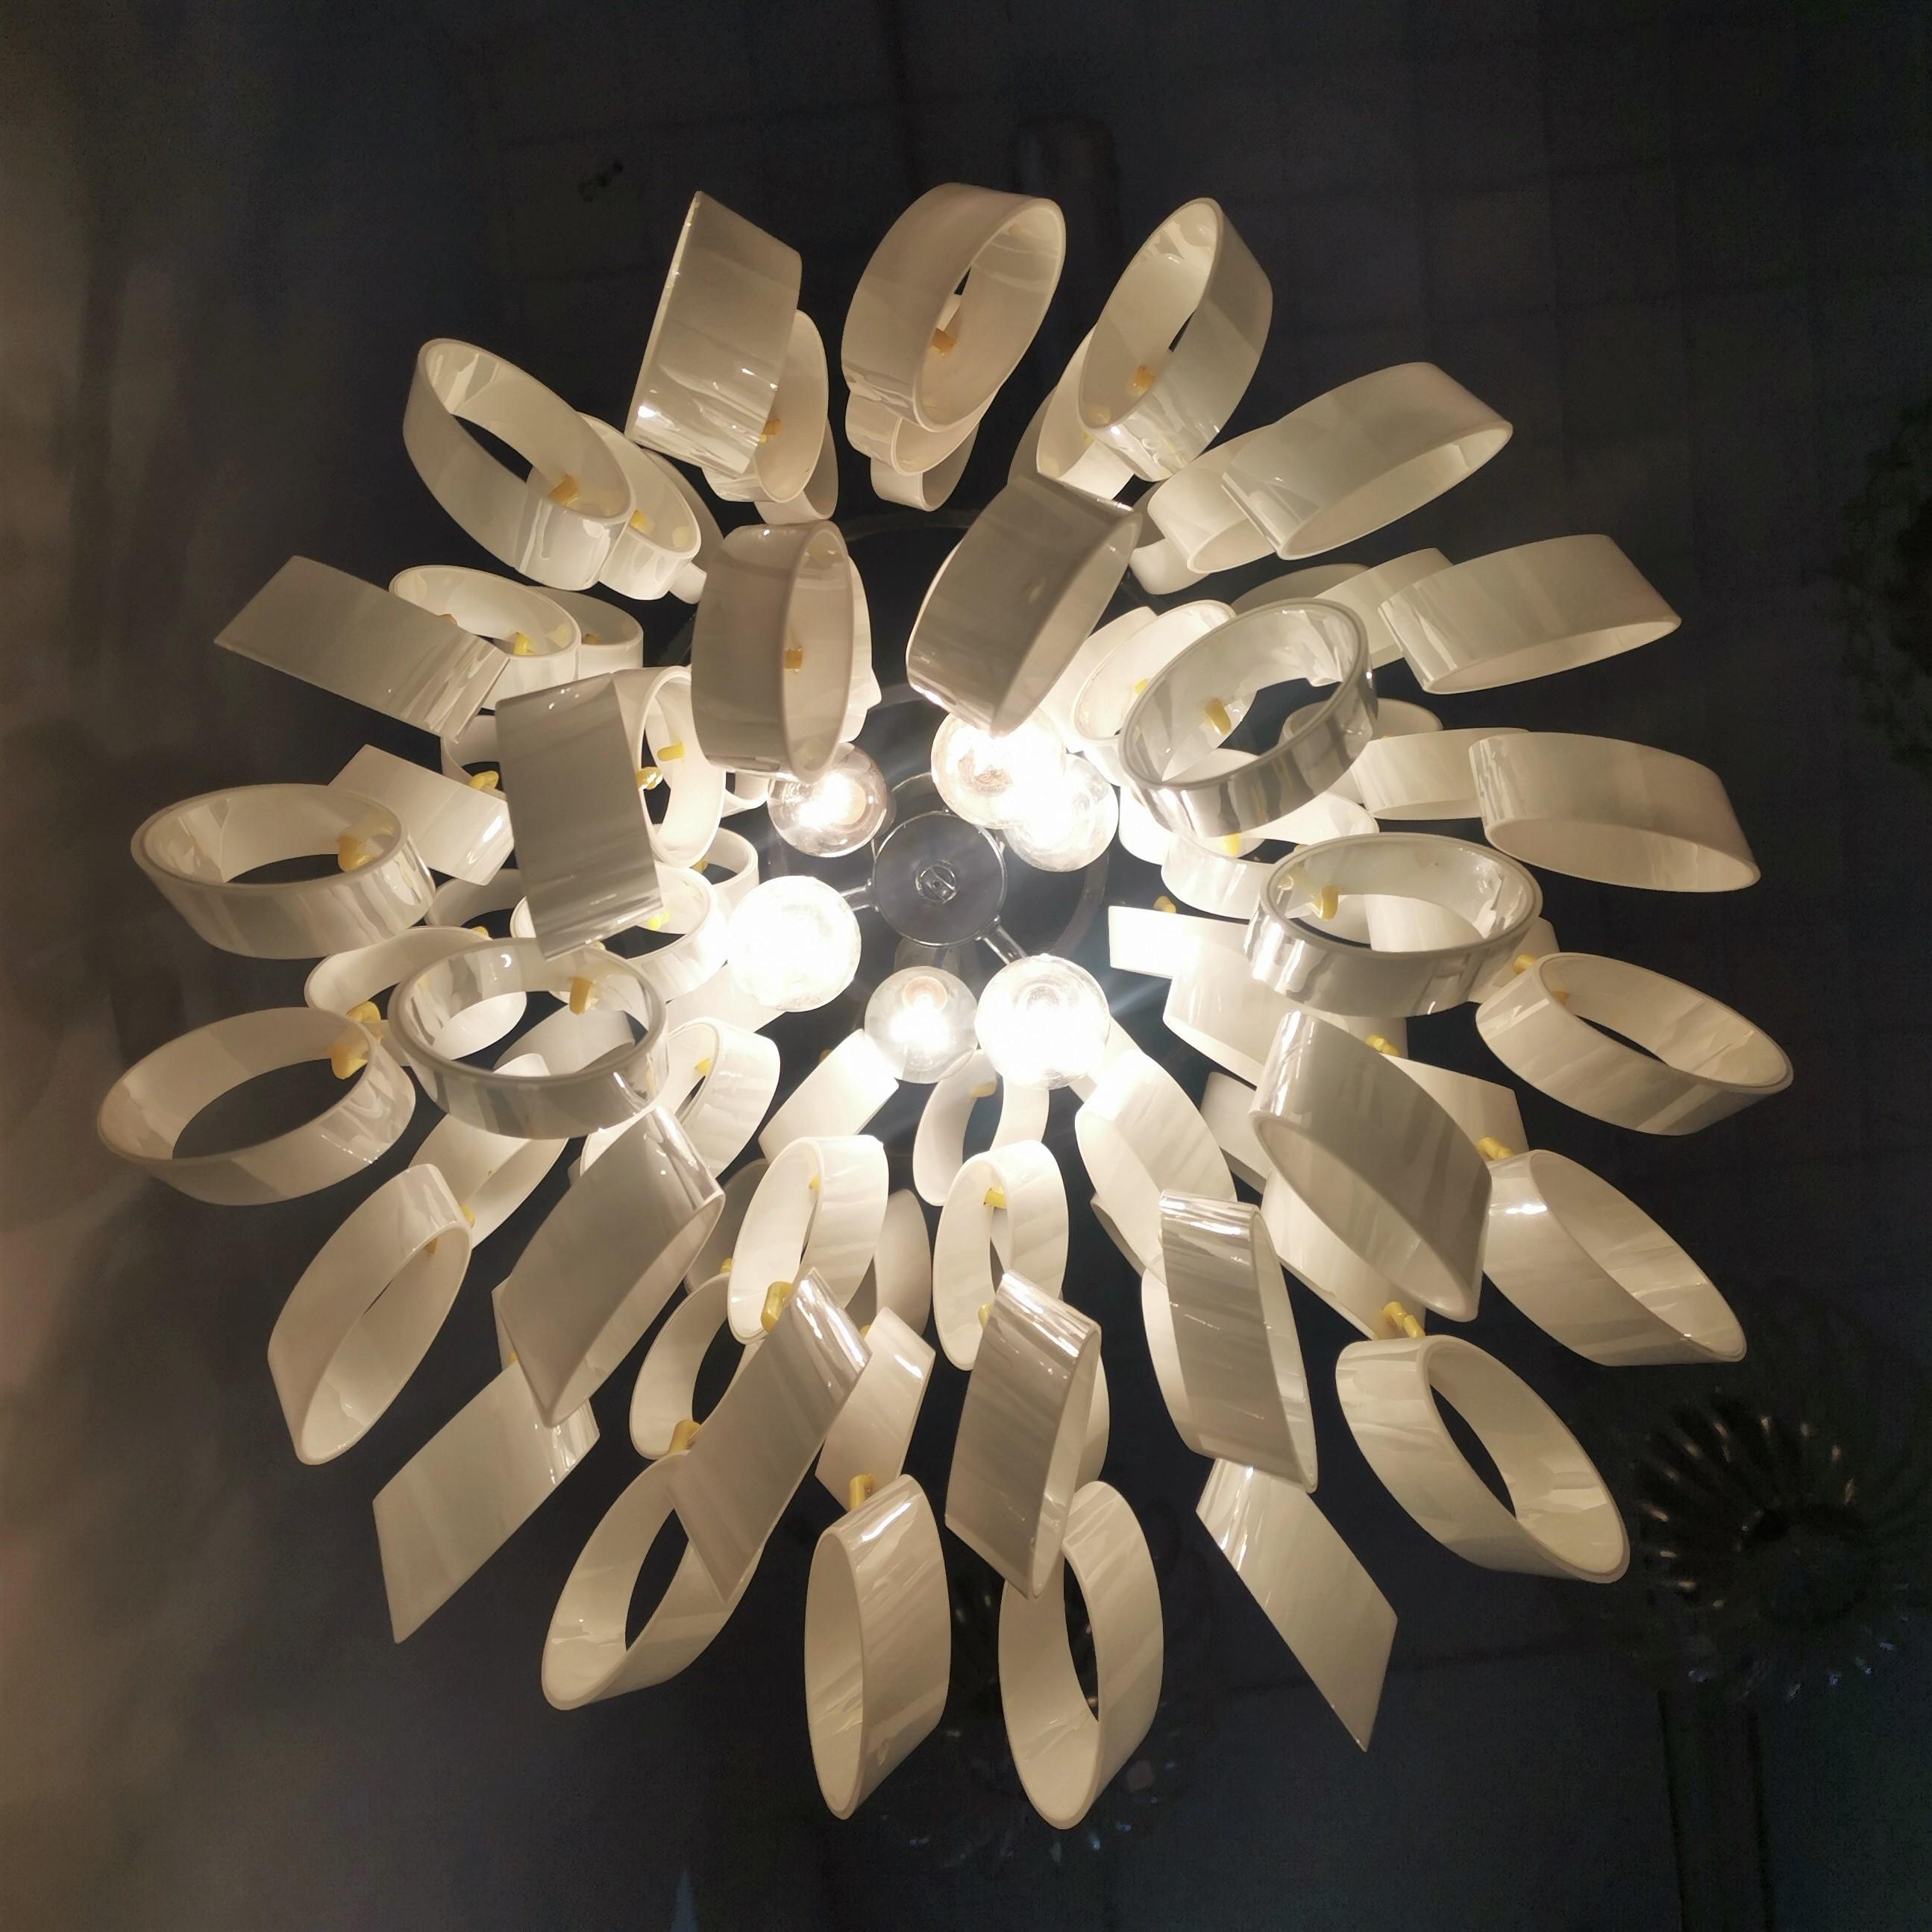 Mid-Century Vistosi Glass Chandelier Made of Modular Elements 1960s Italy For Sale 2